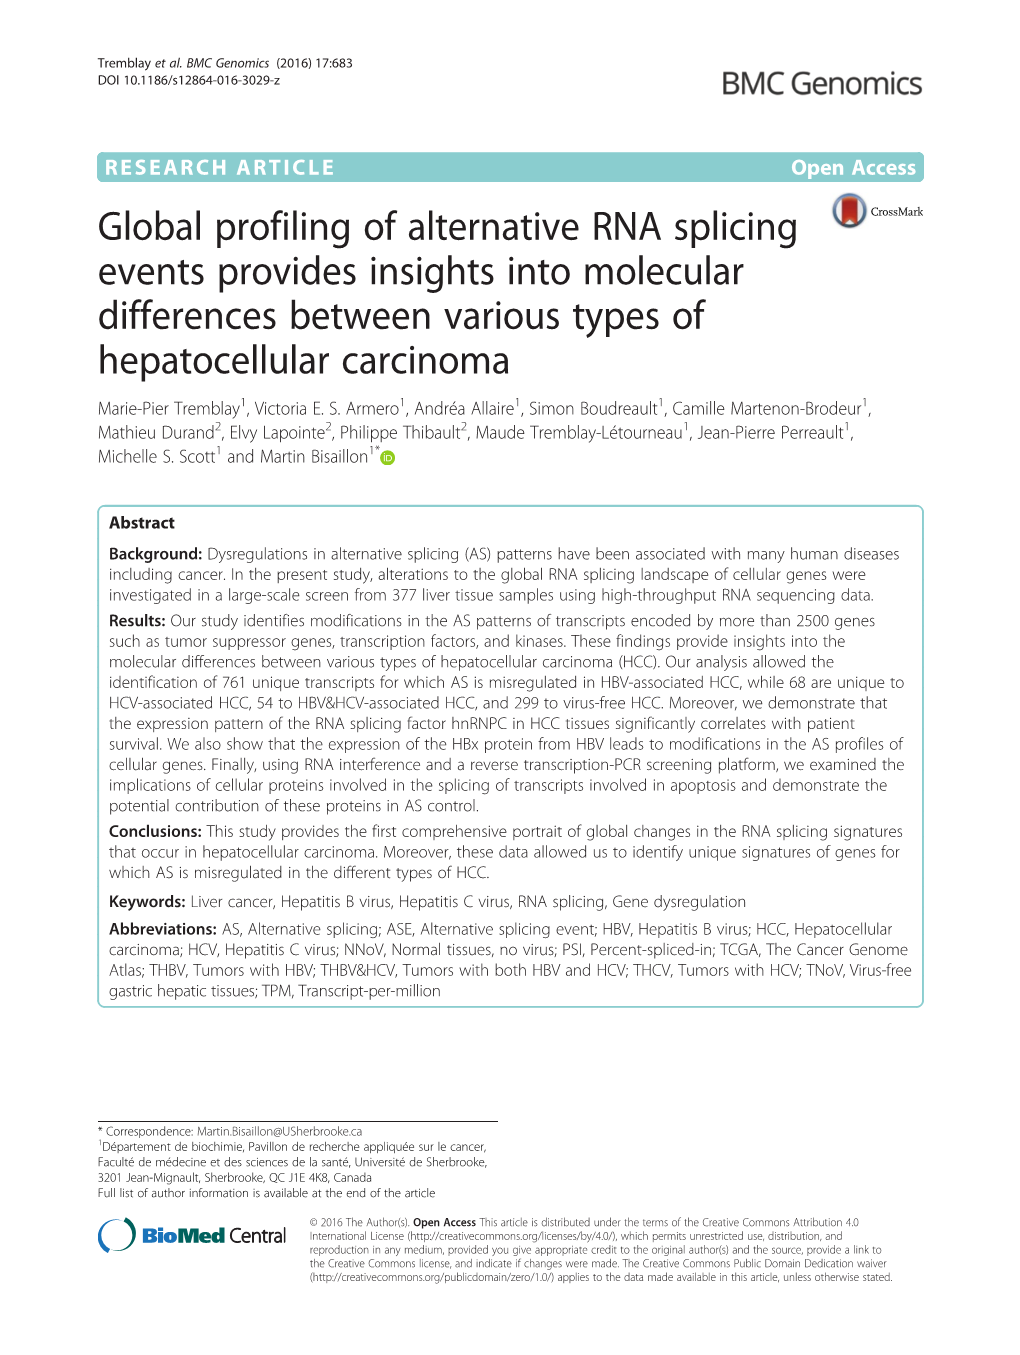 Global Profiling of Alternative RNA Splicing Events Provides Insights Into Molecular Differences Between Various Types of Hepato